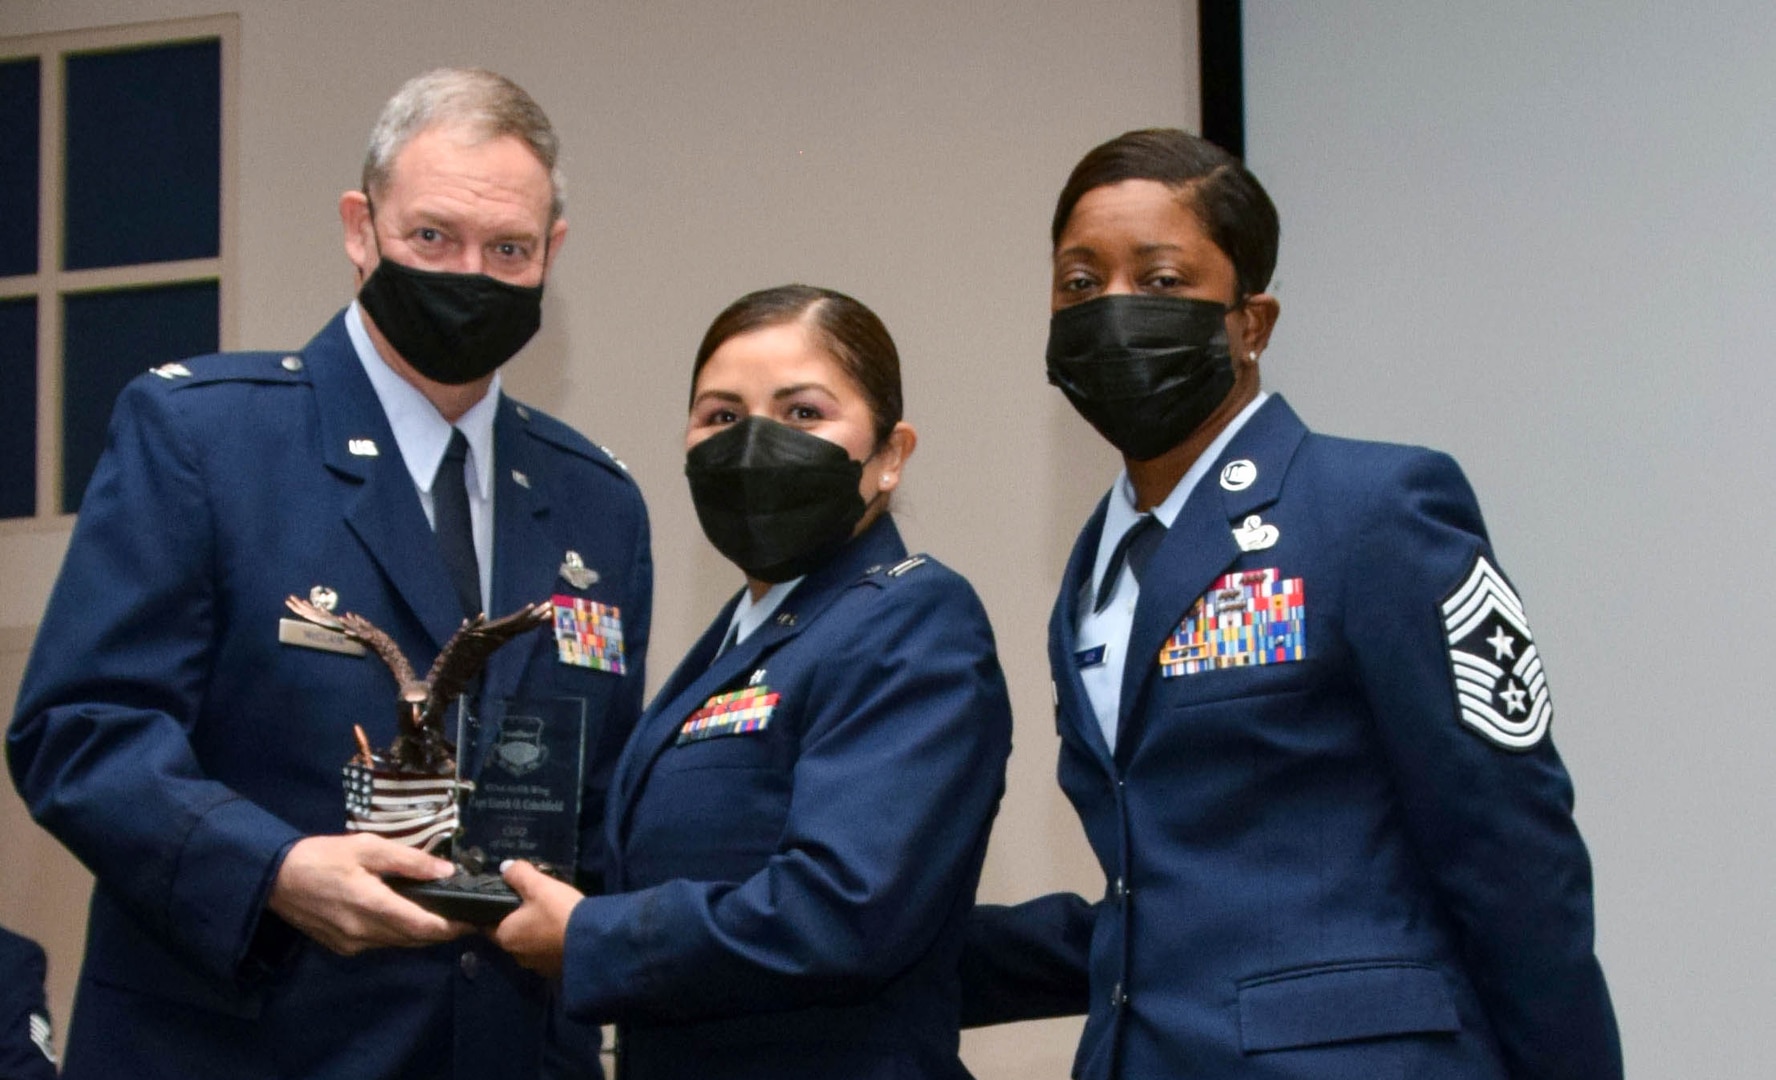 Col. Terry McClain, 433rd Airlift Wing commander, and Chief Master Sgt. Takesha Williams, 433rd AW command chief, present the Company Grade Officer of the Year award to Capt. Lizeth Critchfield, 433rd Medical Squadron, at the wing’s annual awards ceremony Feb. 5, 2022, at Joint Base San Antonio-Lackland, Texas. (U.S. Air Force photo by Staff Sgt. Monet Villacorte)